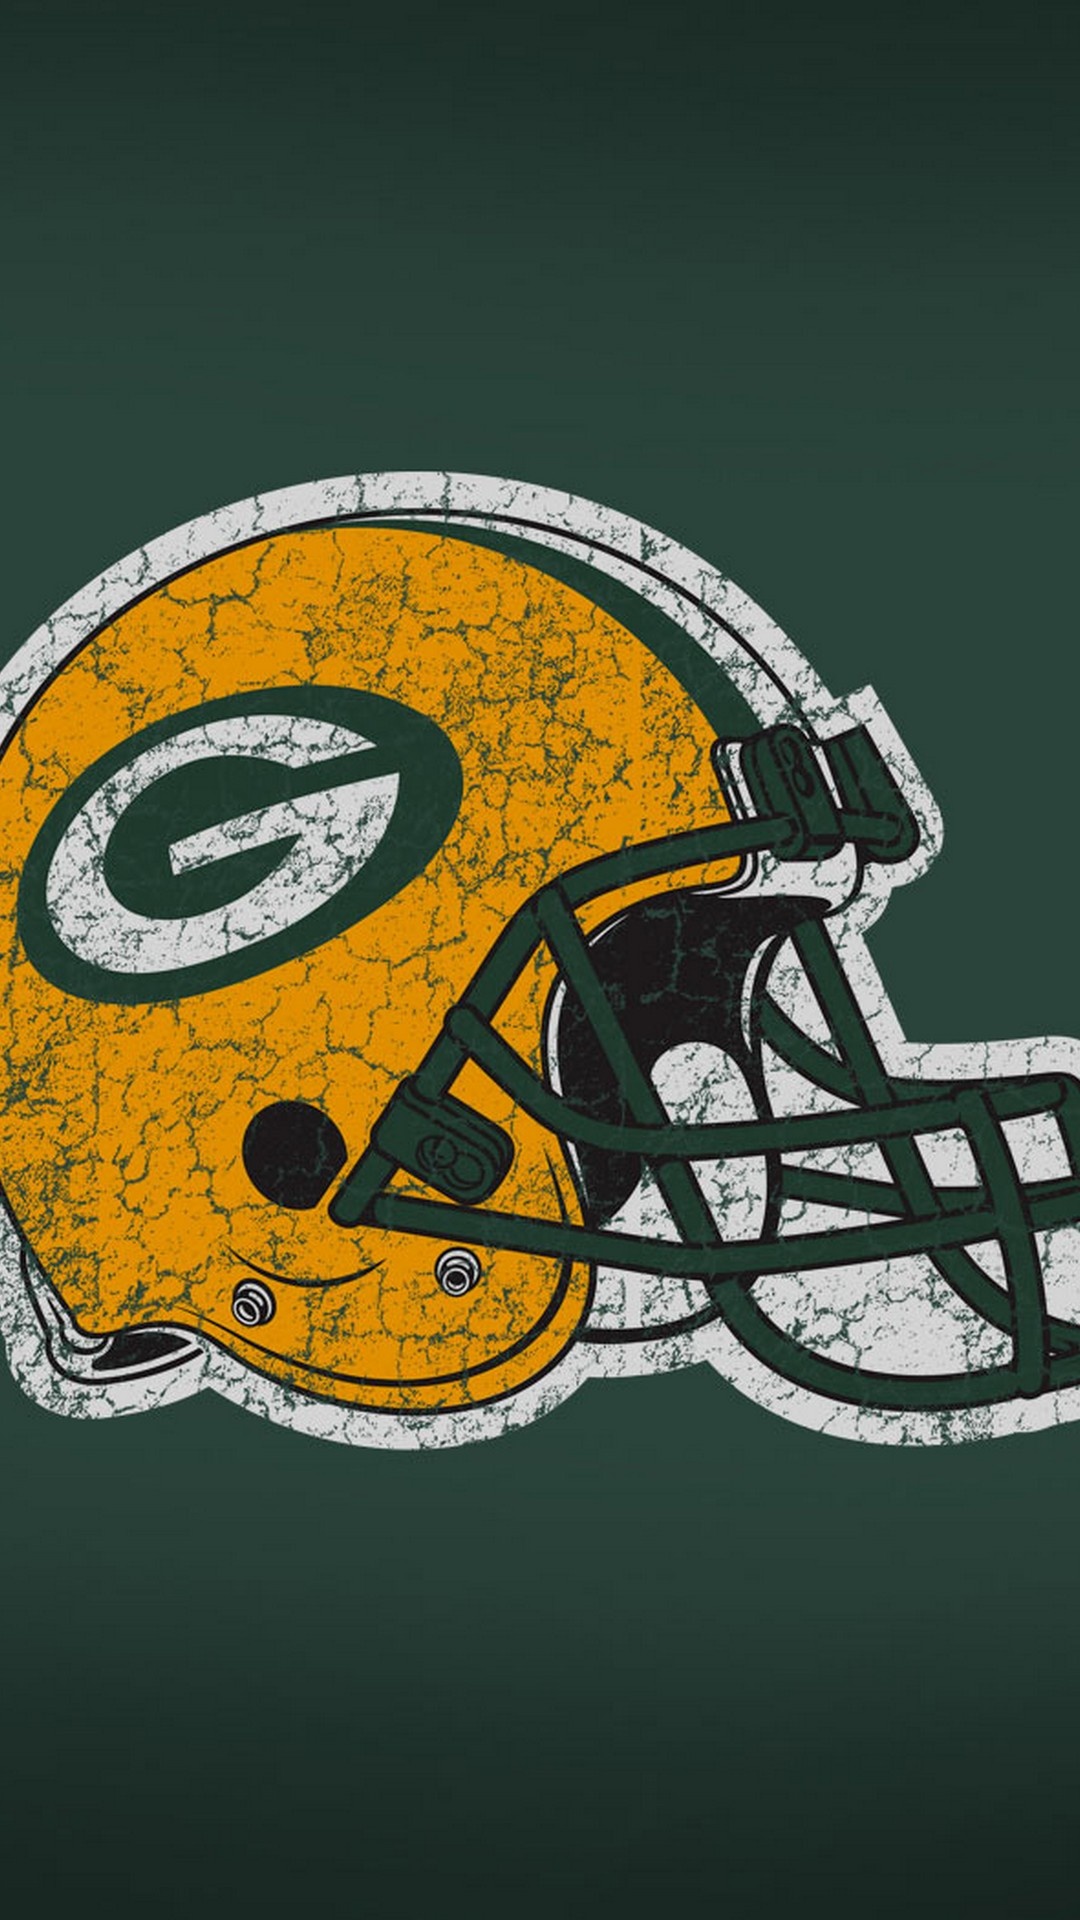 Green Bay Packers: Holds an NFL record of 29 consecutive home games without defeat. 1080x1920 Full HD Wallpaper.